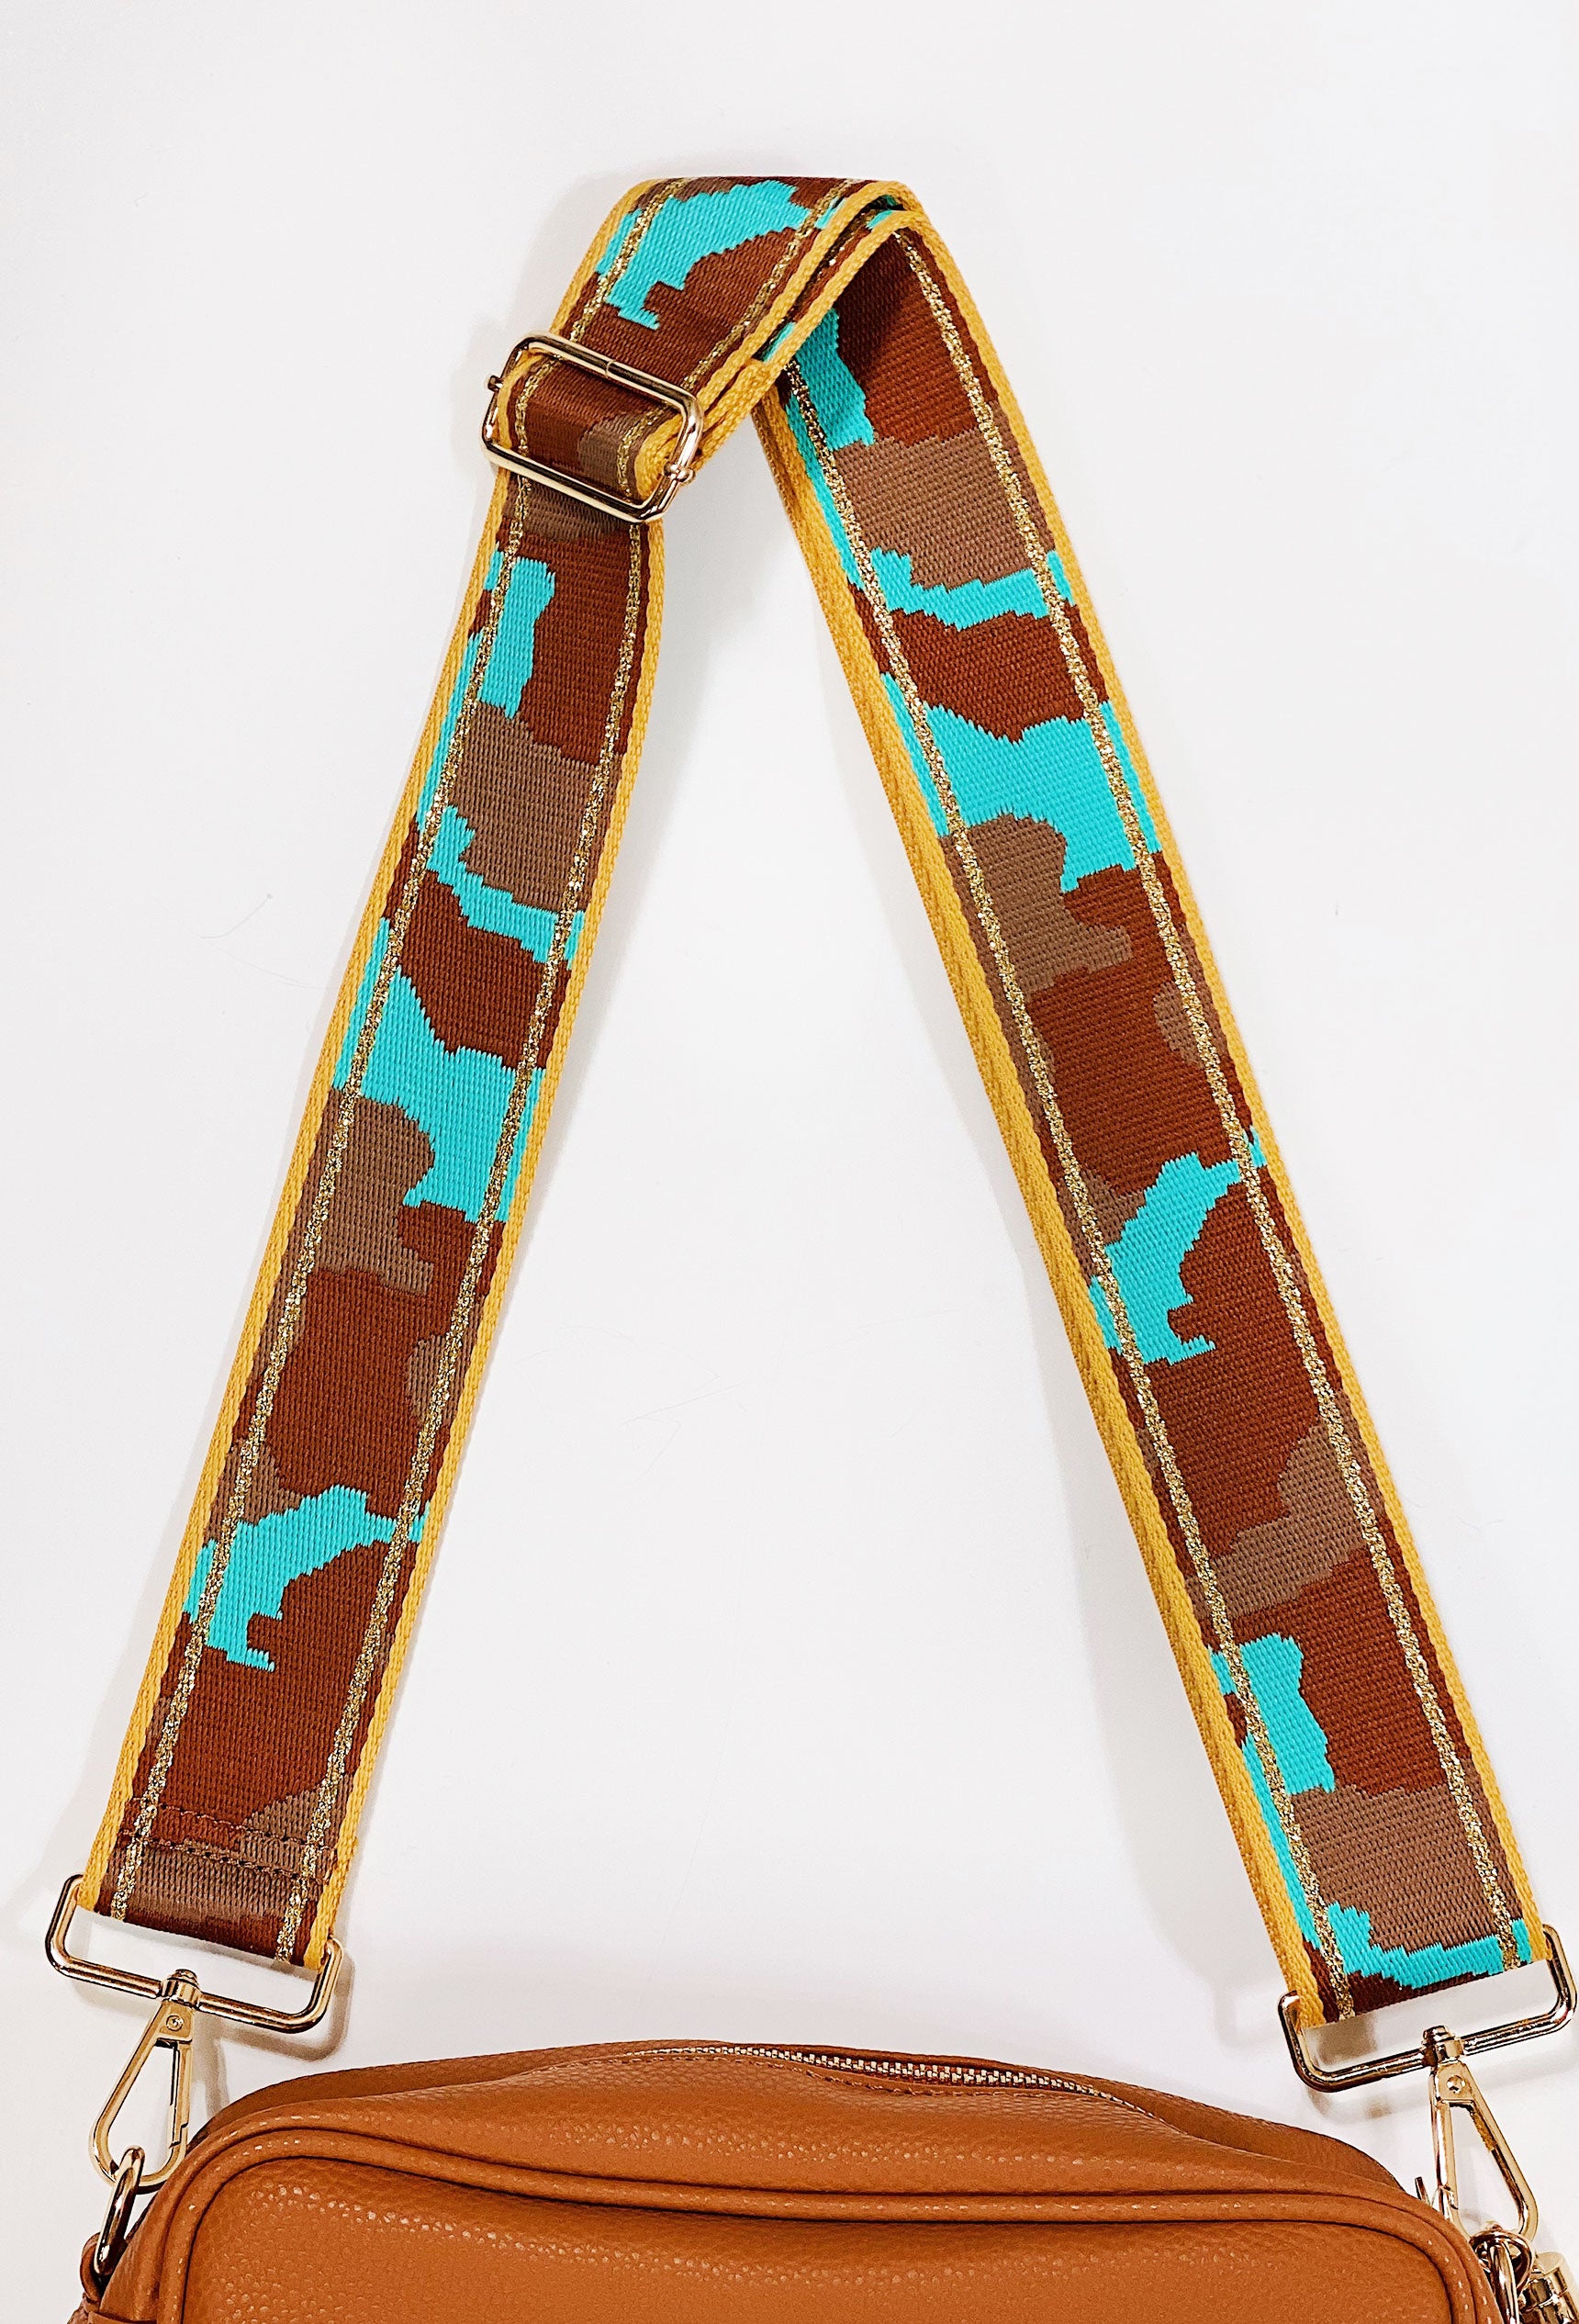 Crossbody Bag Shoulder Strap in Turquoise Camo, Groovy's